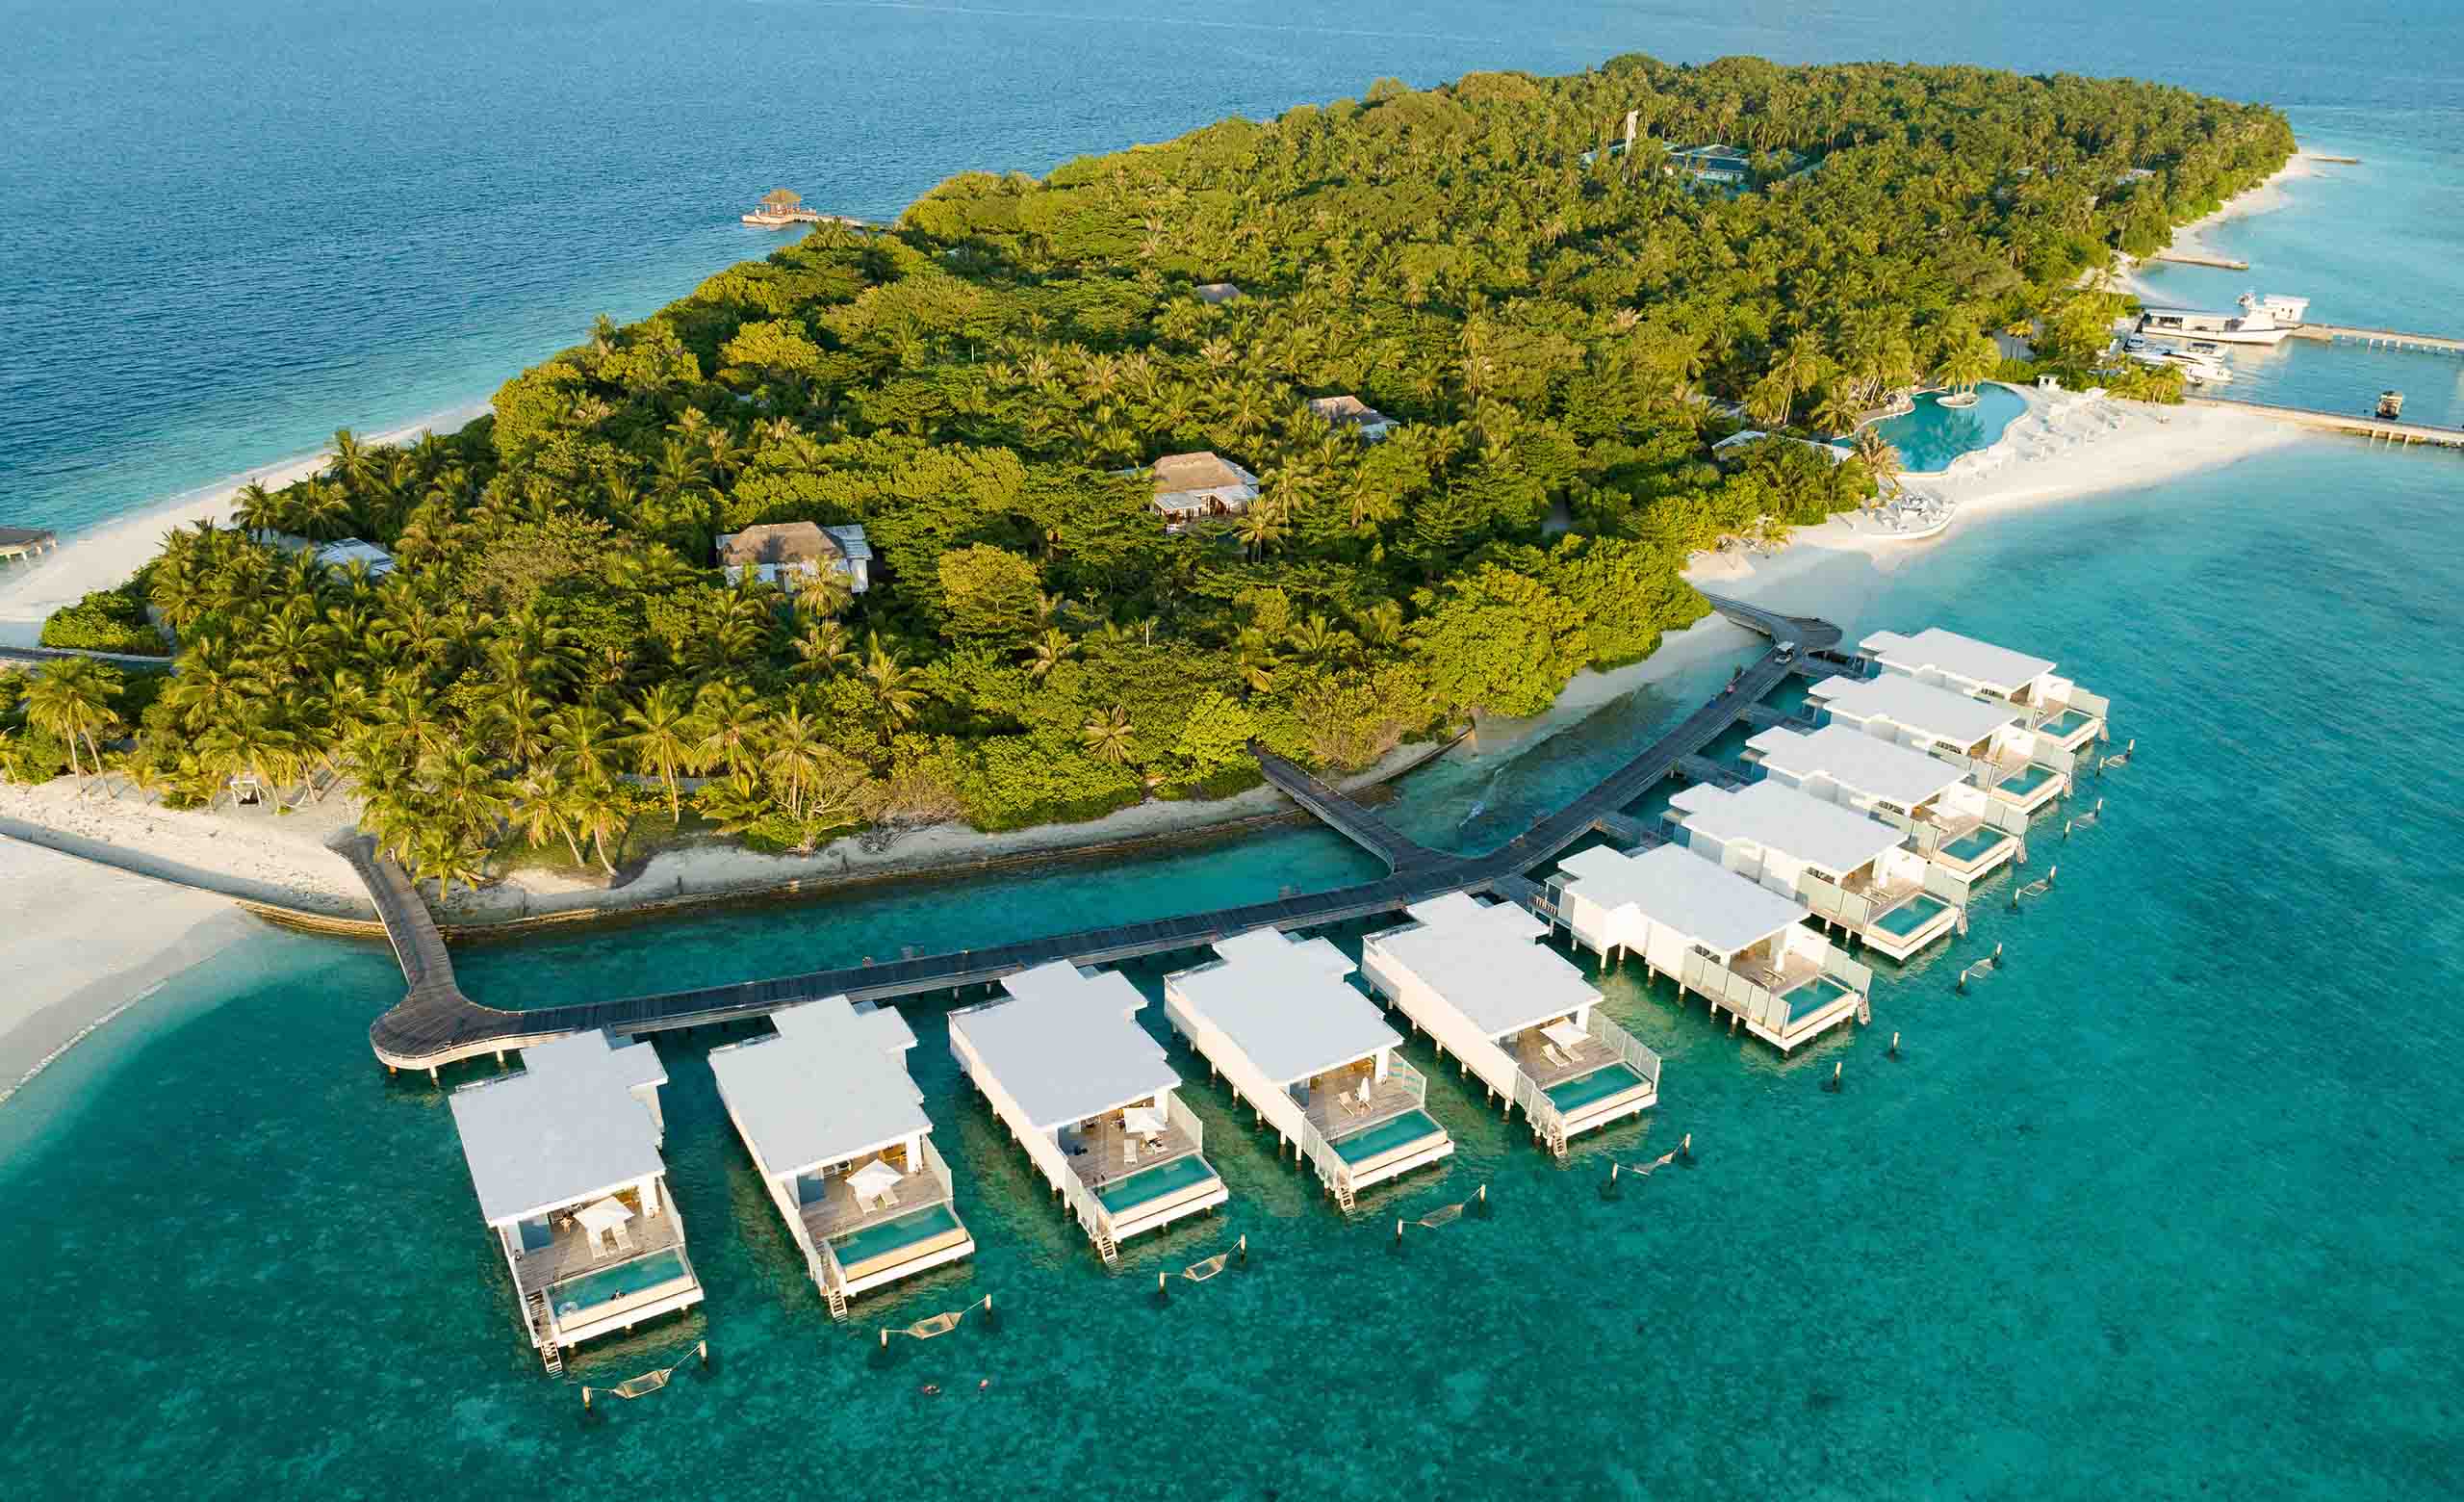 An overhead view of our Sunset Water Villas with private pool and hammocks situated over the ocean.